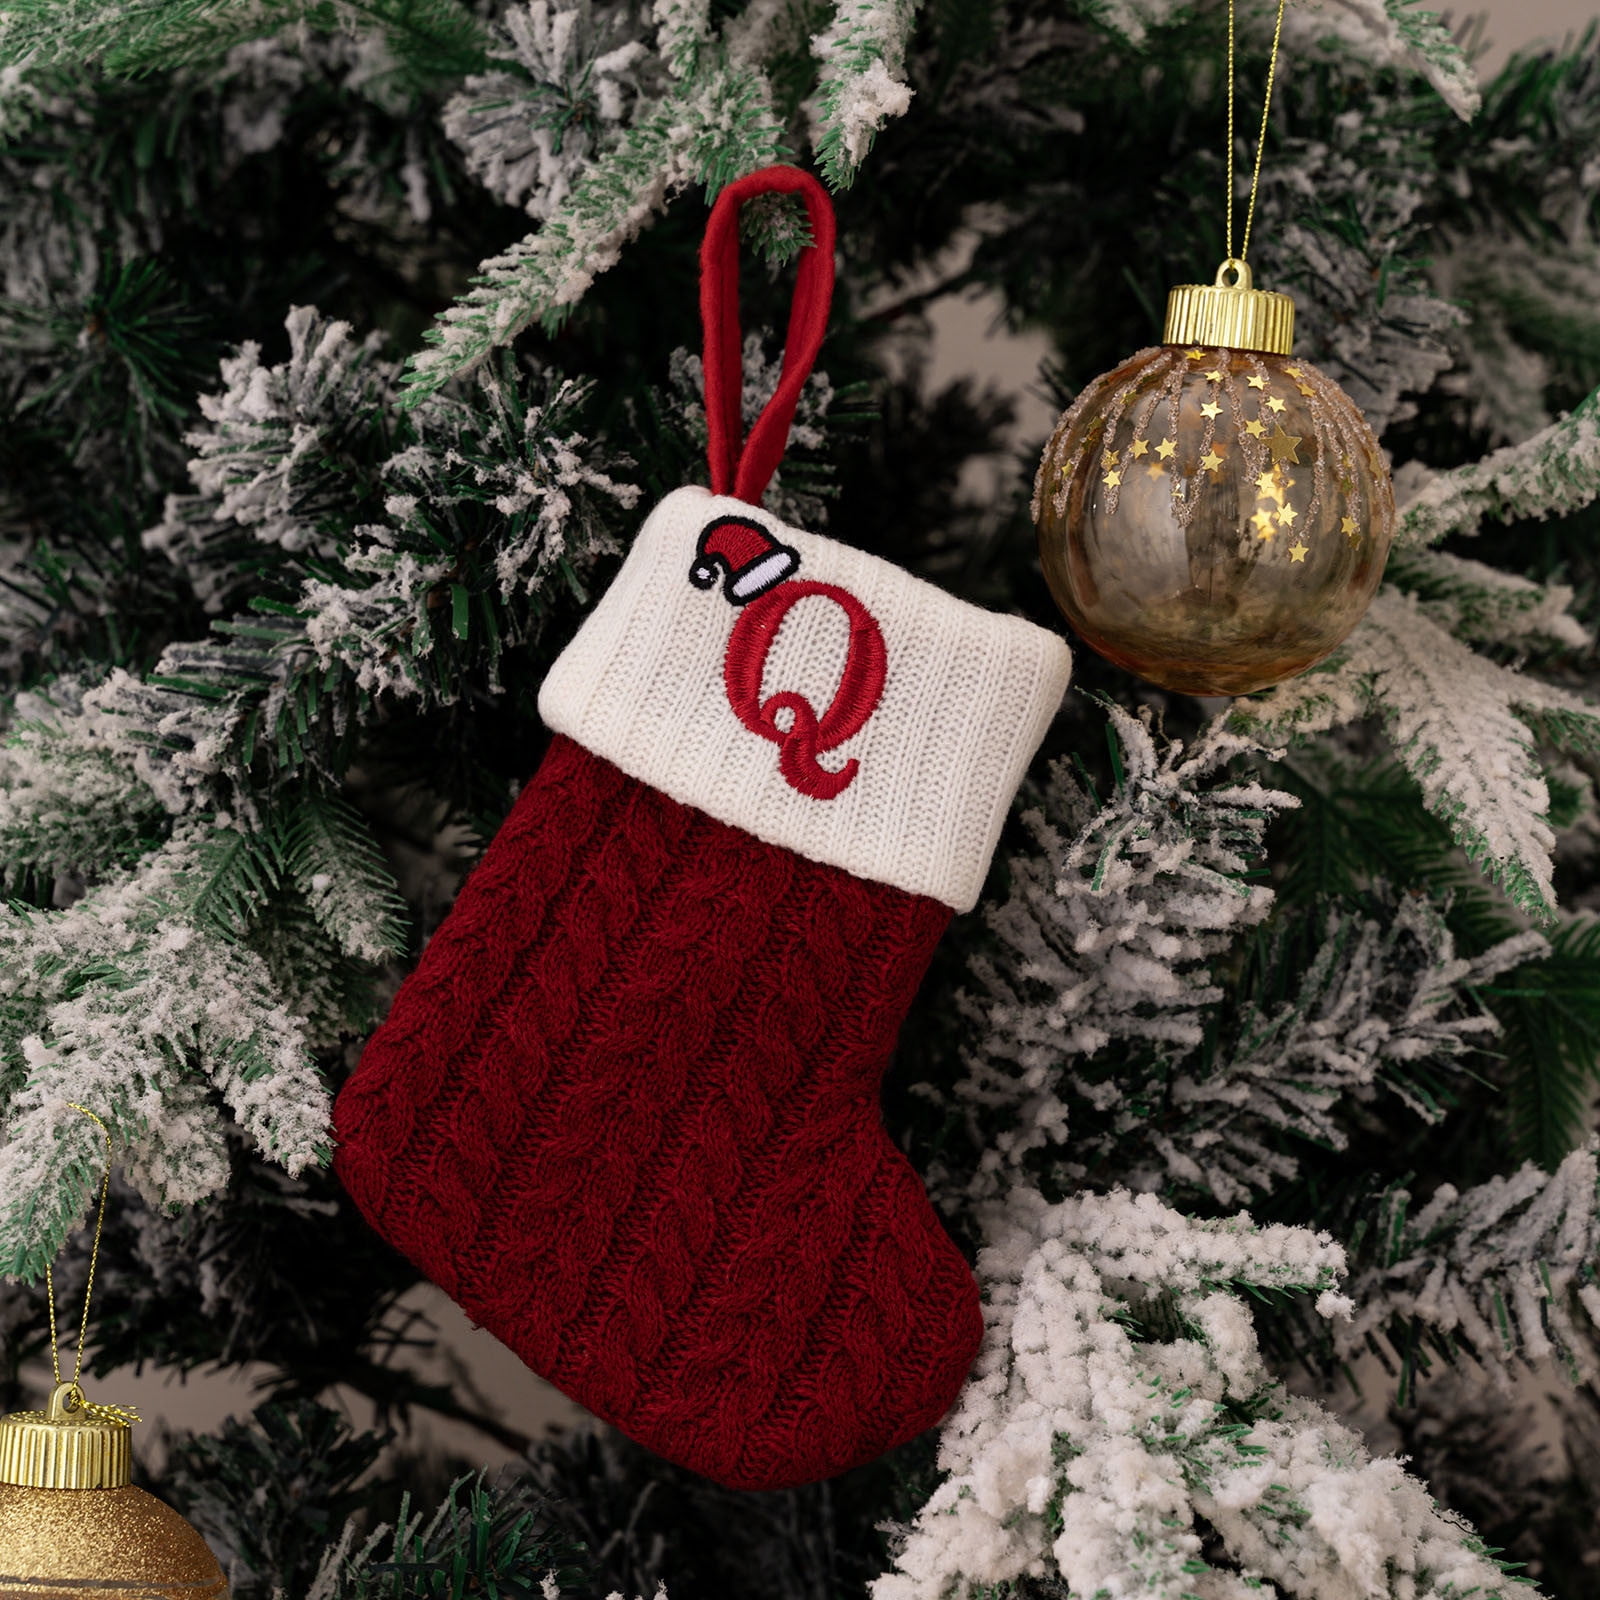 Pitauce Christmas Stockings with Name Tags, Cable Knitted Xmas Hanging Stocking Decorations for Holiday Christmas Party Family Decor Gift Favors